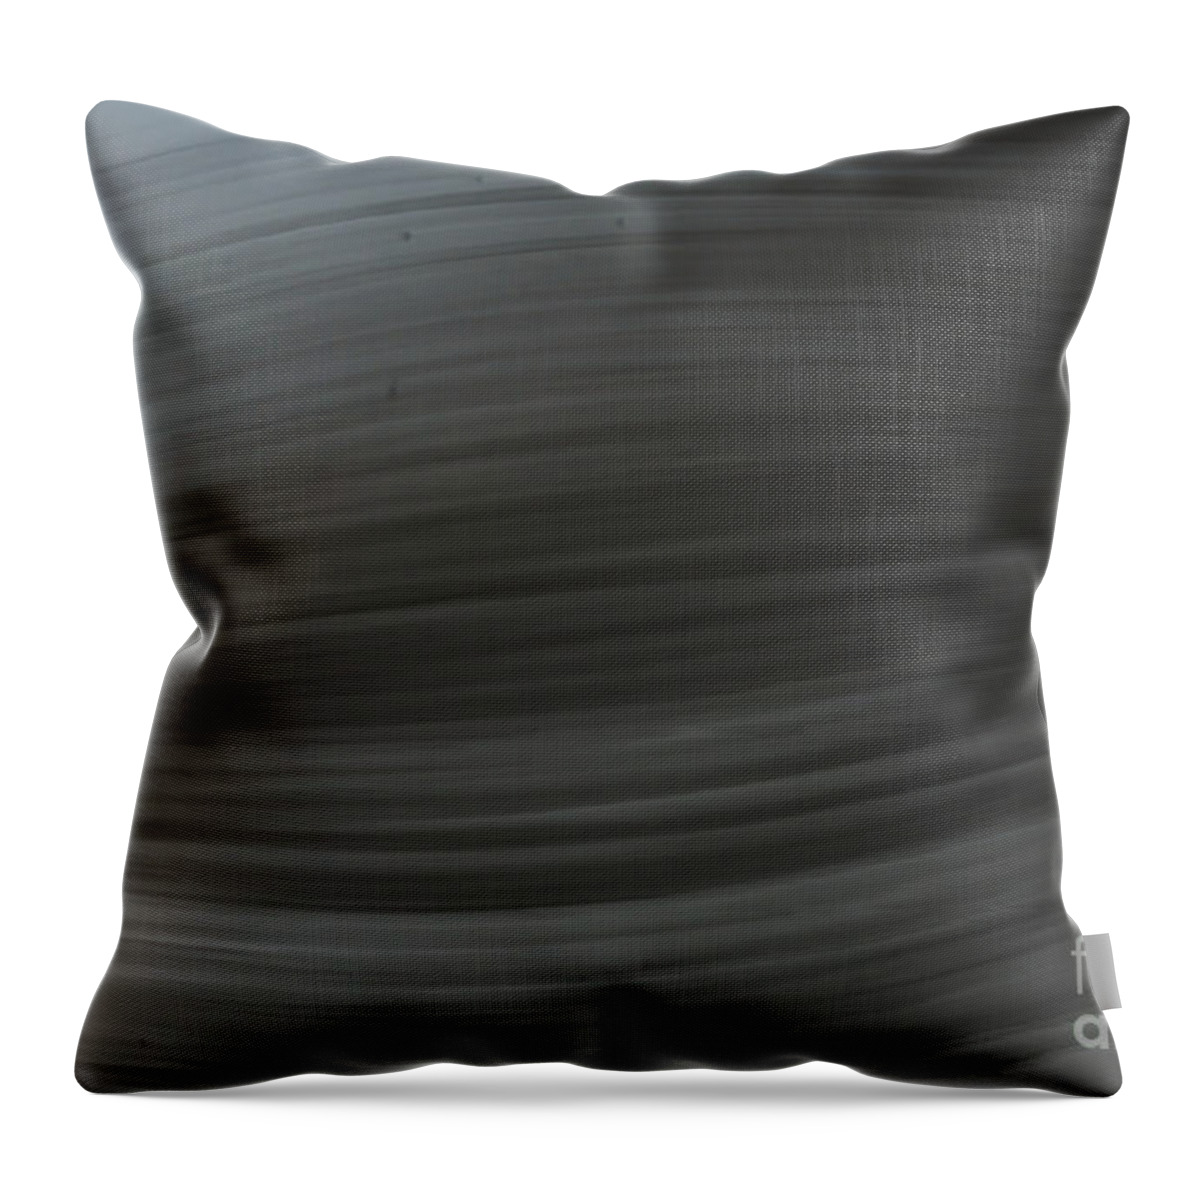 Digital Art Throw Pillow featuring the mixed media Dust In The Wind by Kim Henderson